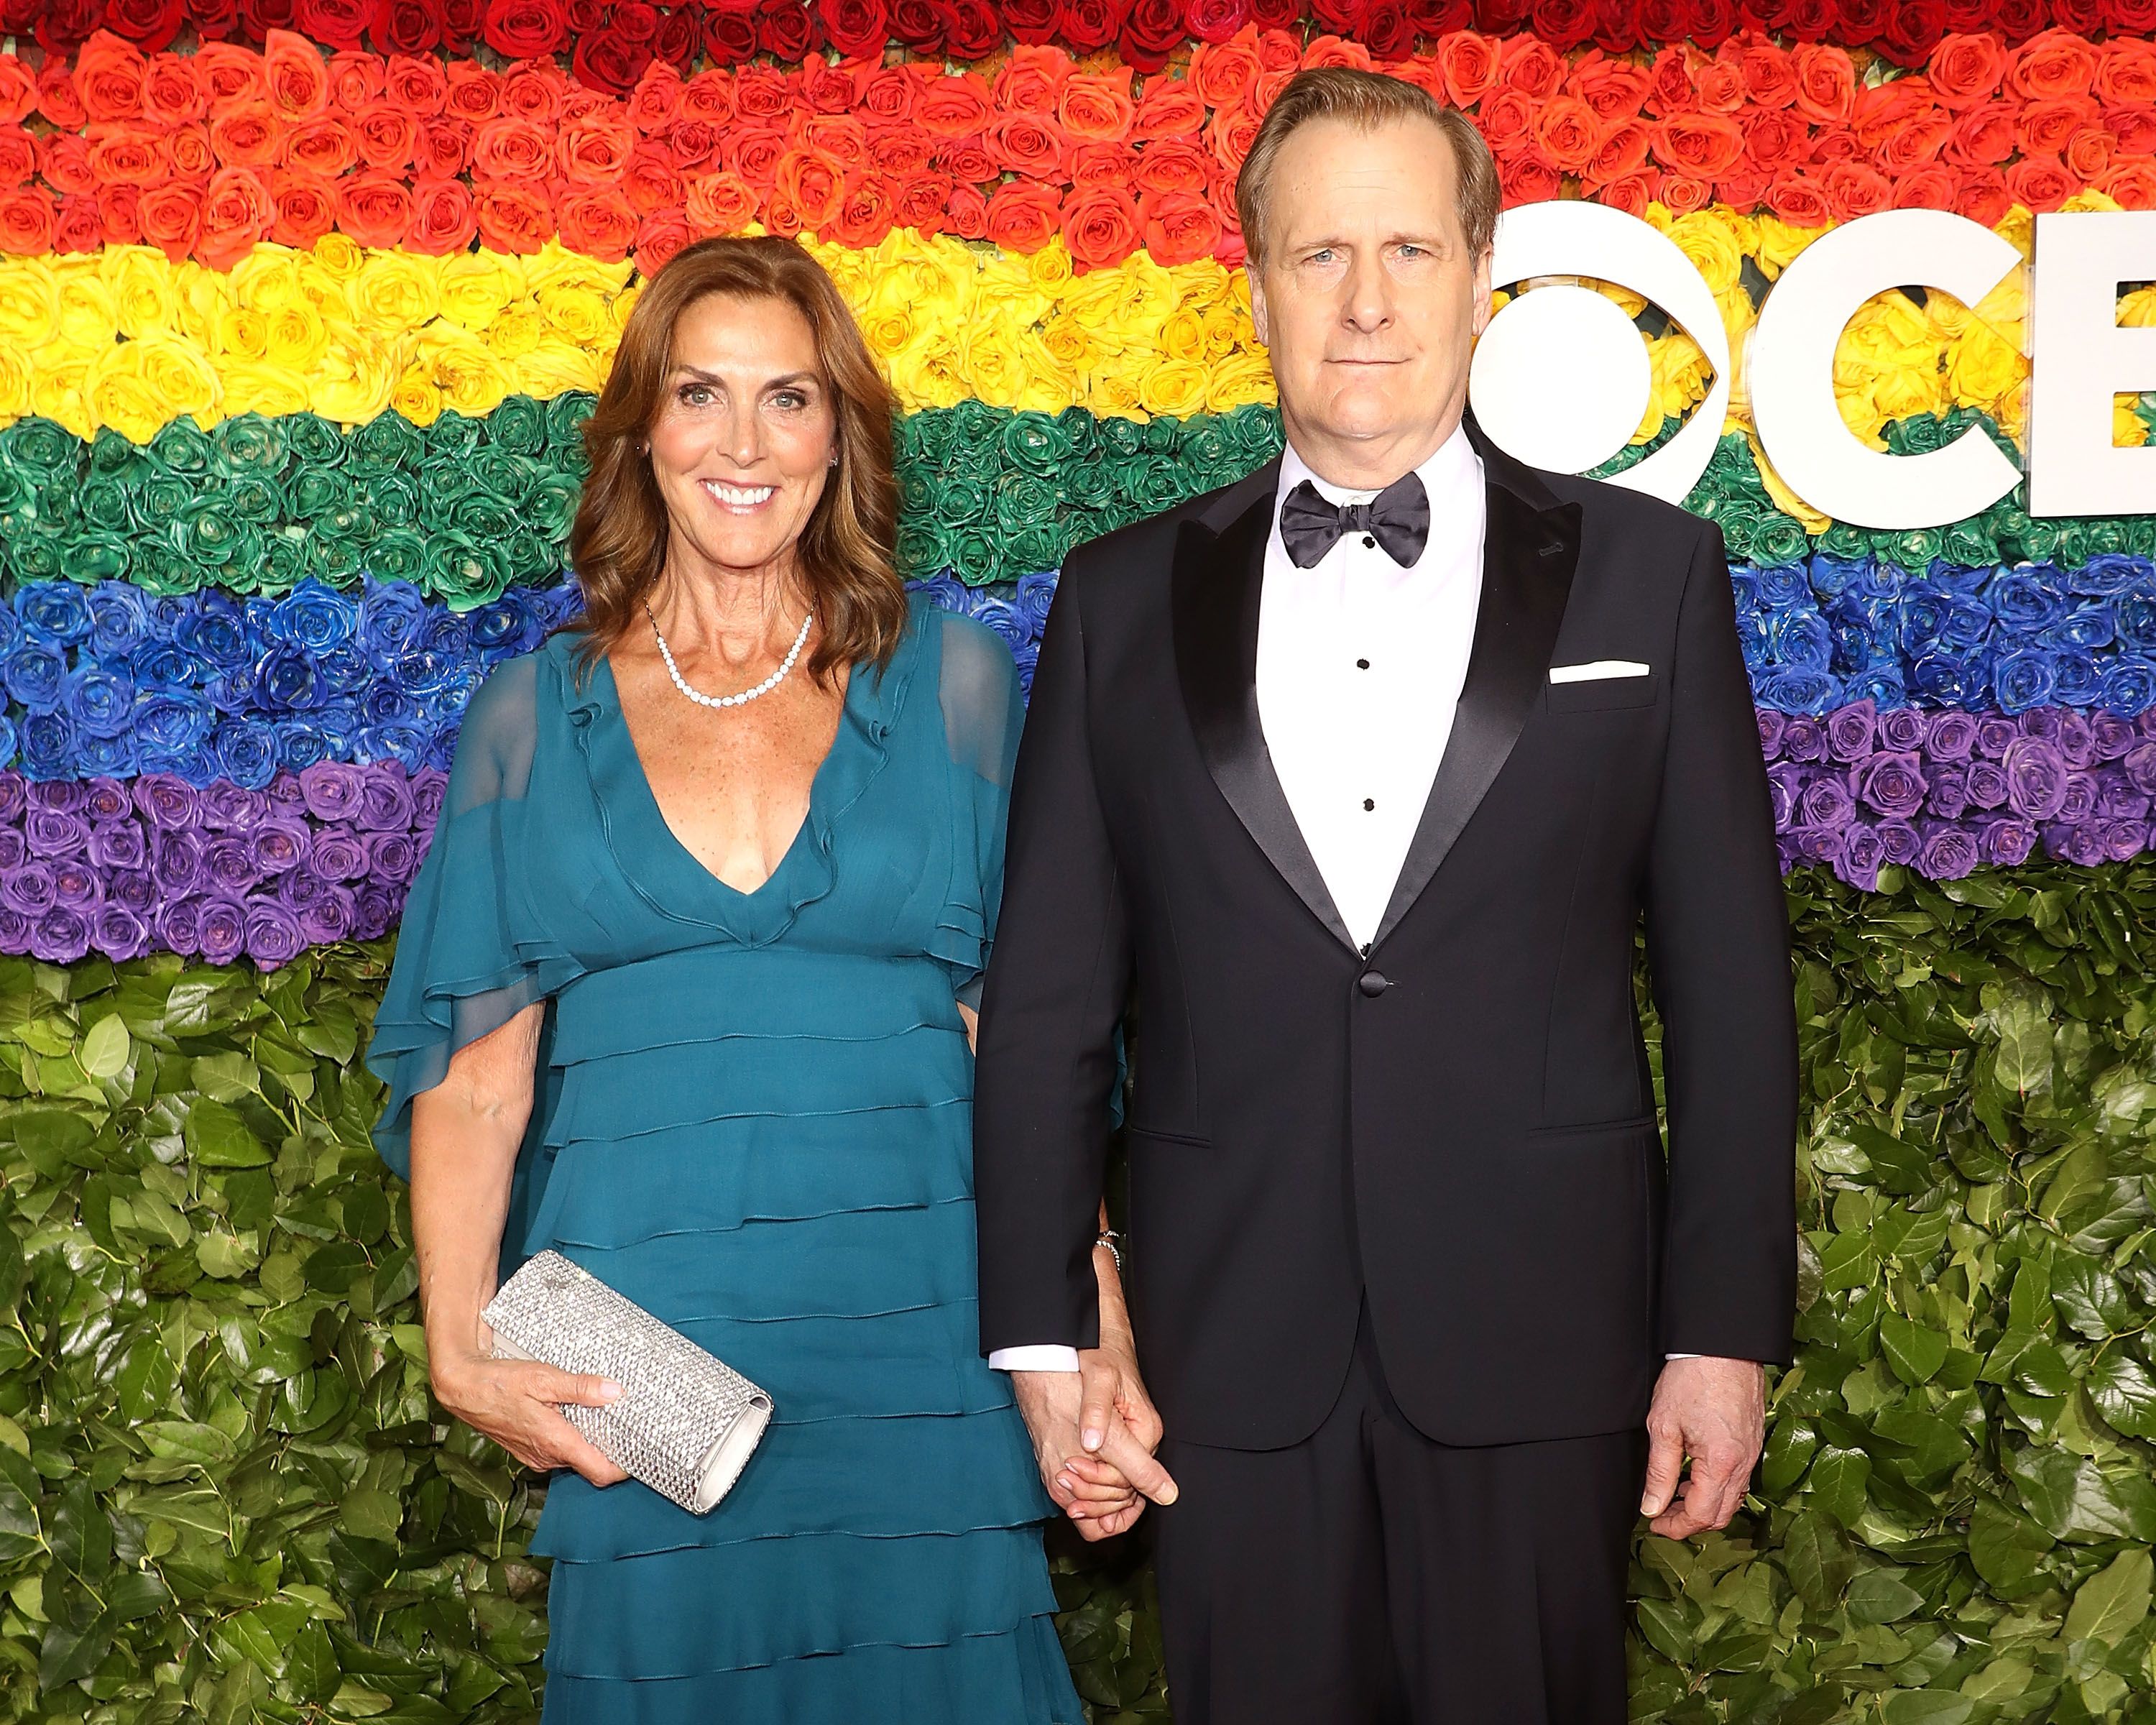 Kathleen Treado and Jeff Daniels at the Tony Awards on June 9, 2019, in New York City. | Source: Taylor Hill/FilmMagic/Getty Images